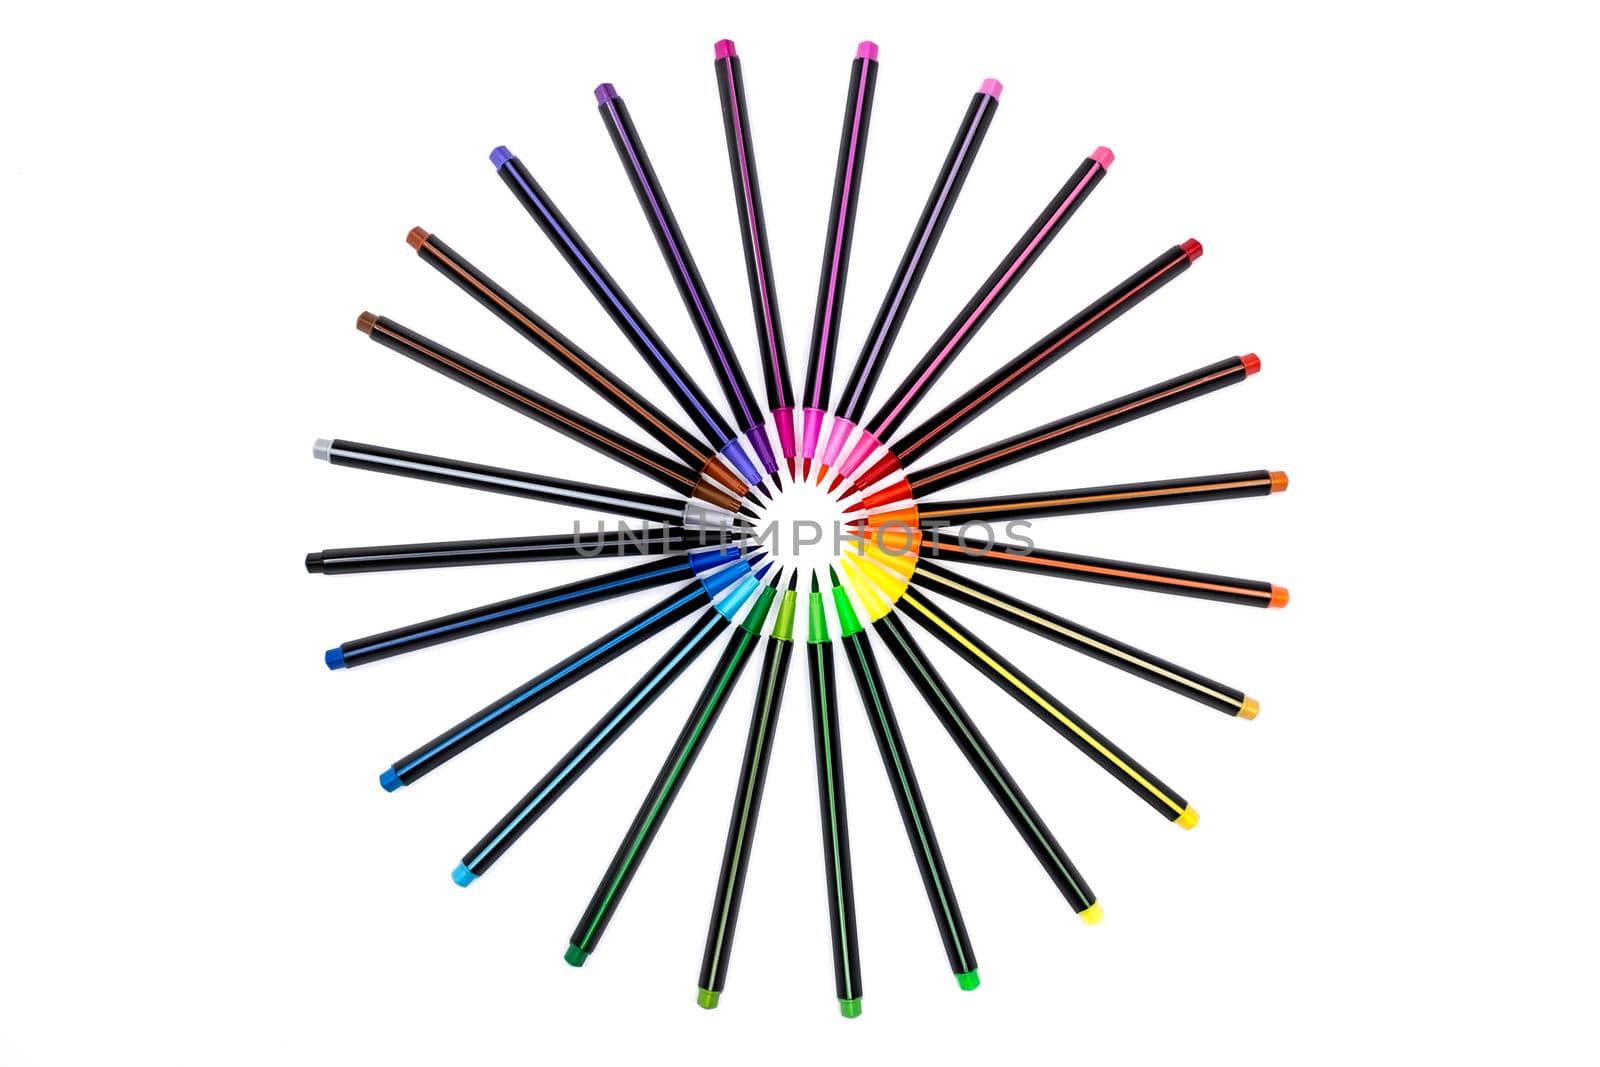 A set of bright multi-colored felt-tip markers lie in a circle,